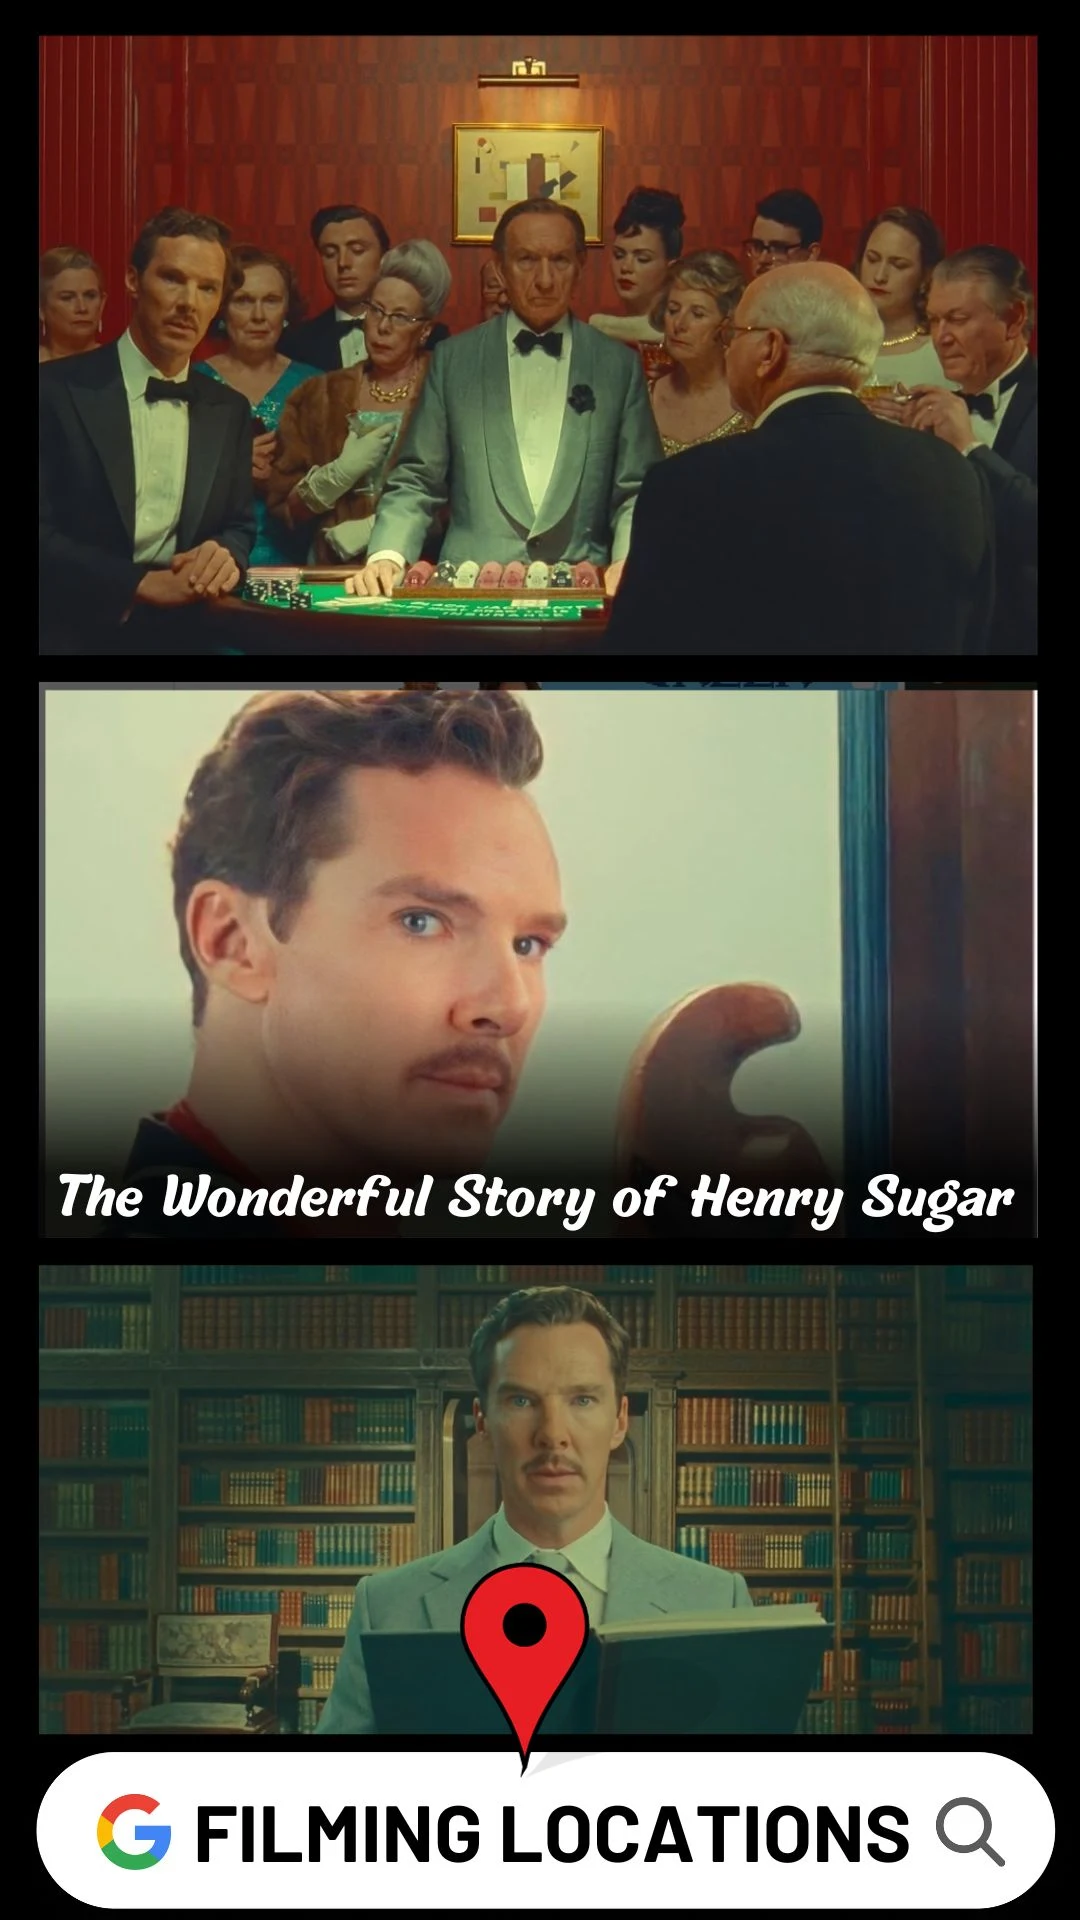 The Wonderful Story of Henry Sugar Filming Locations